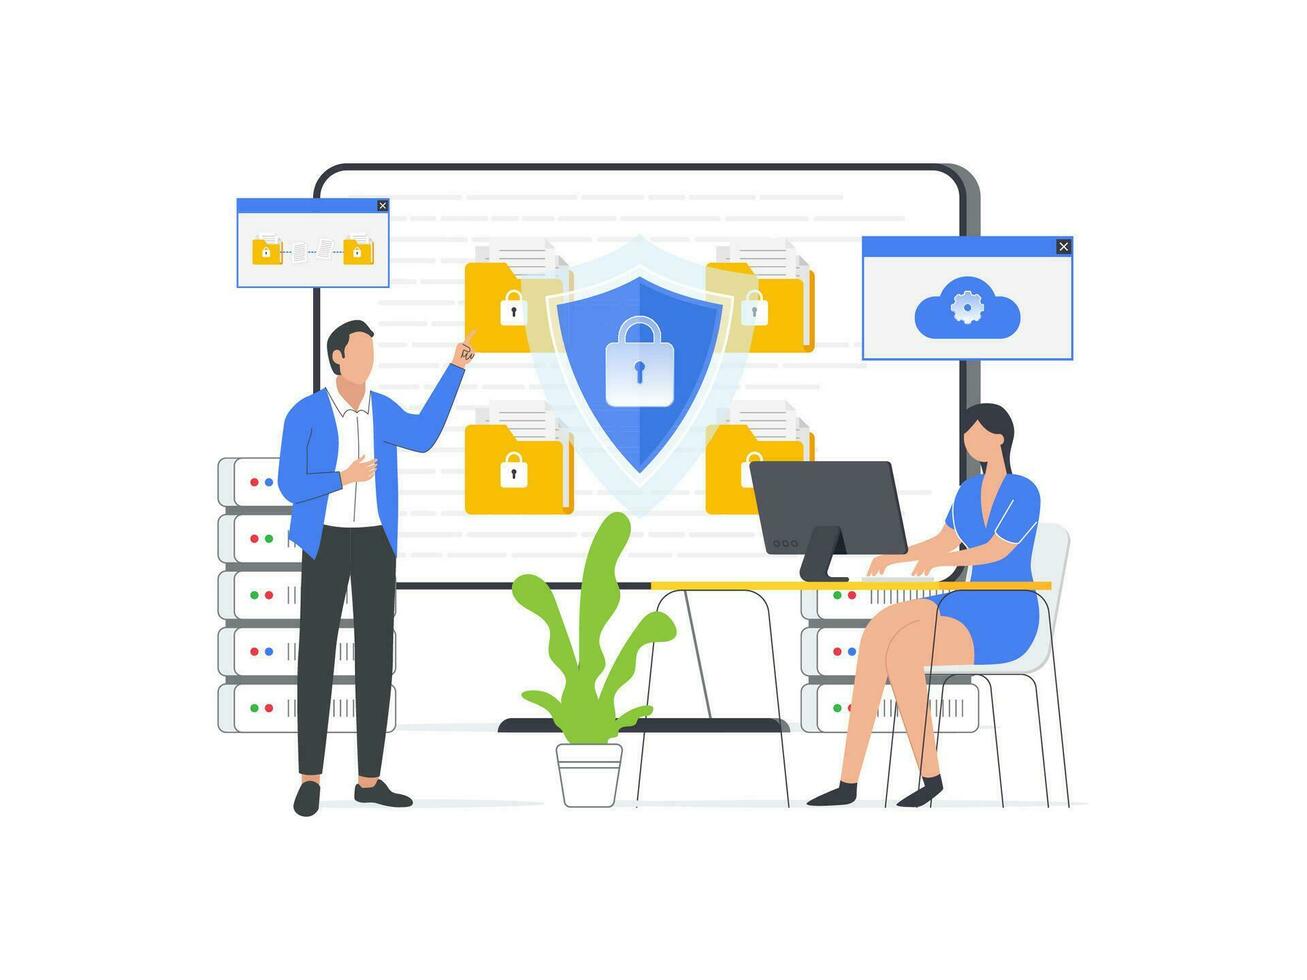 Illustration of data security. A shield on a computer desktop or laptop protects sensitive data, ensuring internet security. Vector design with character illustration.